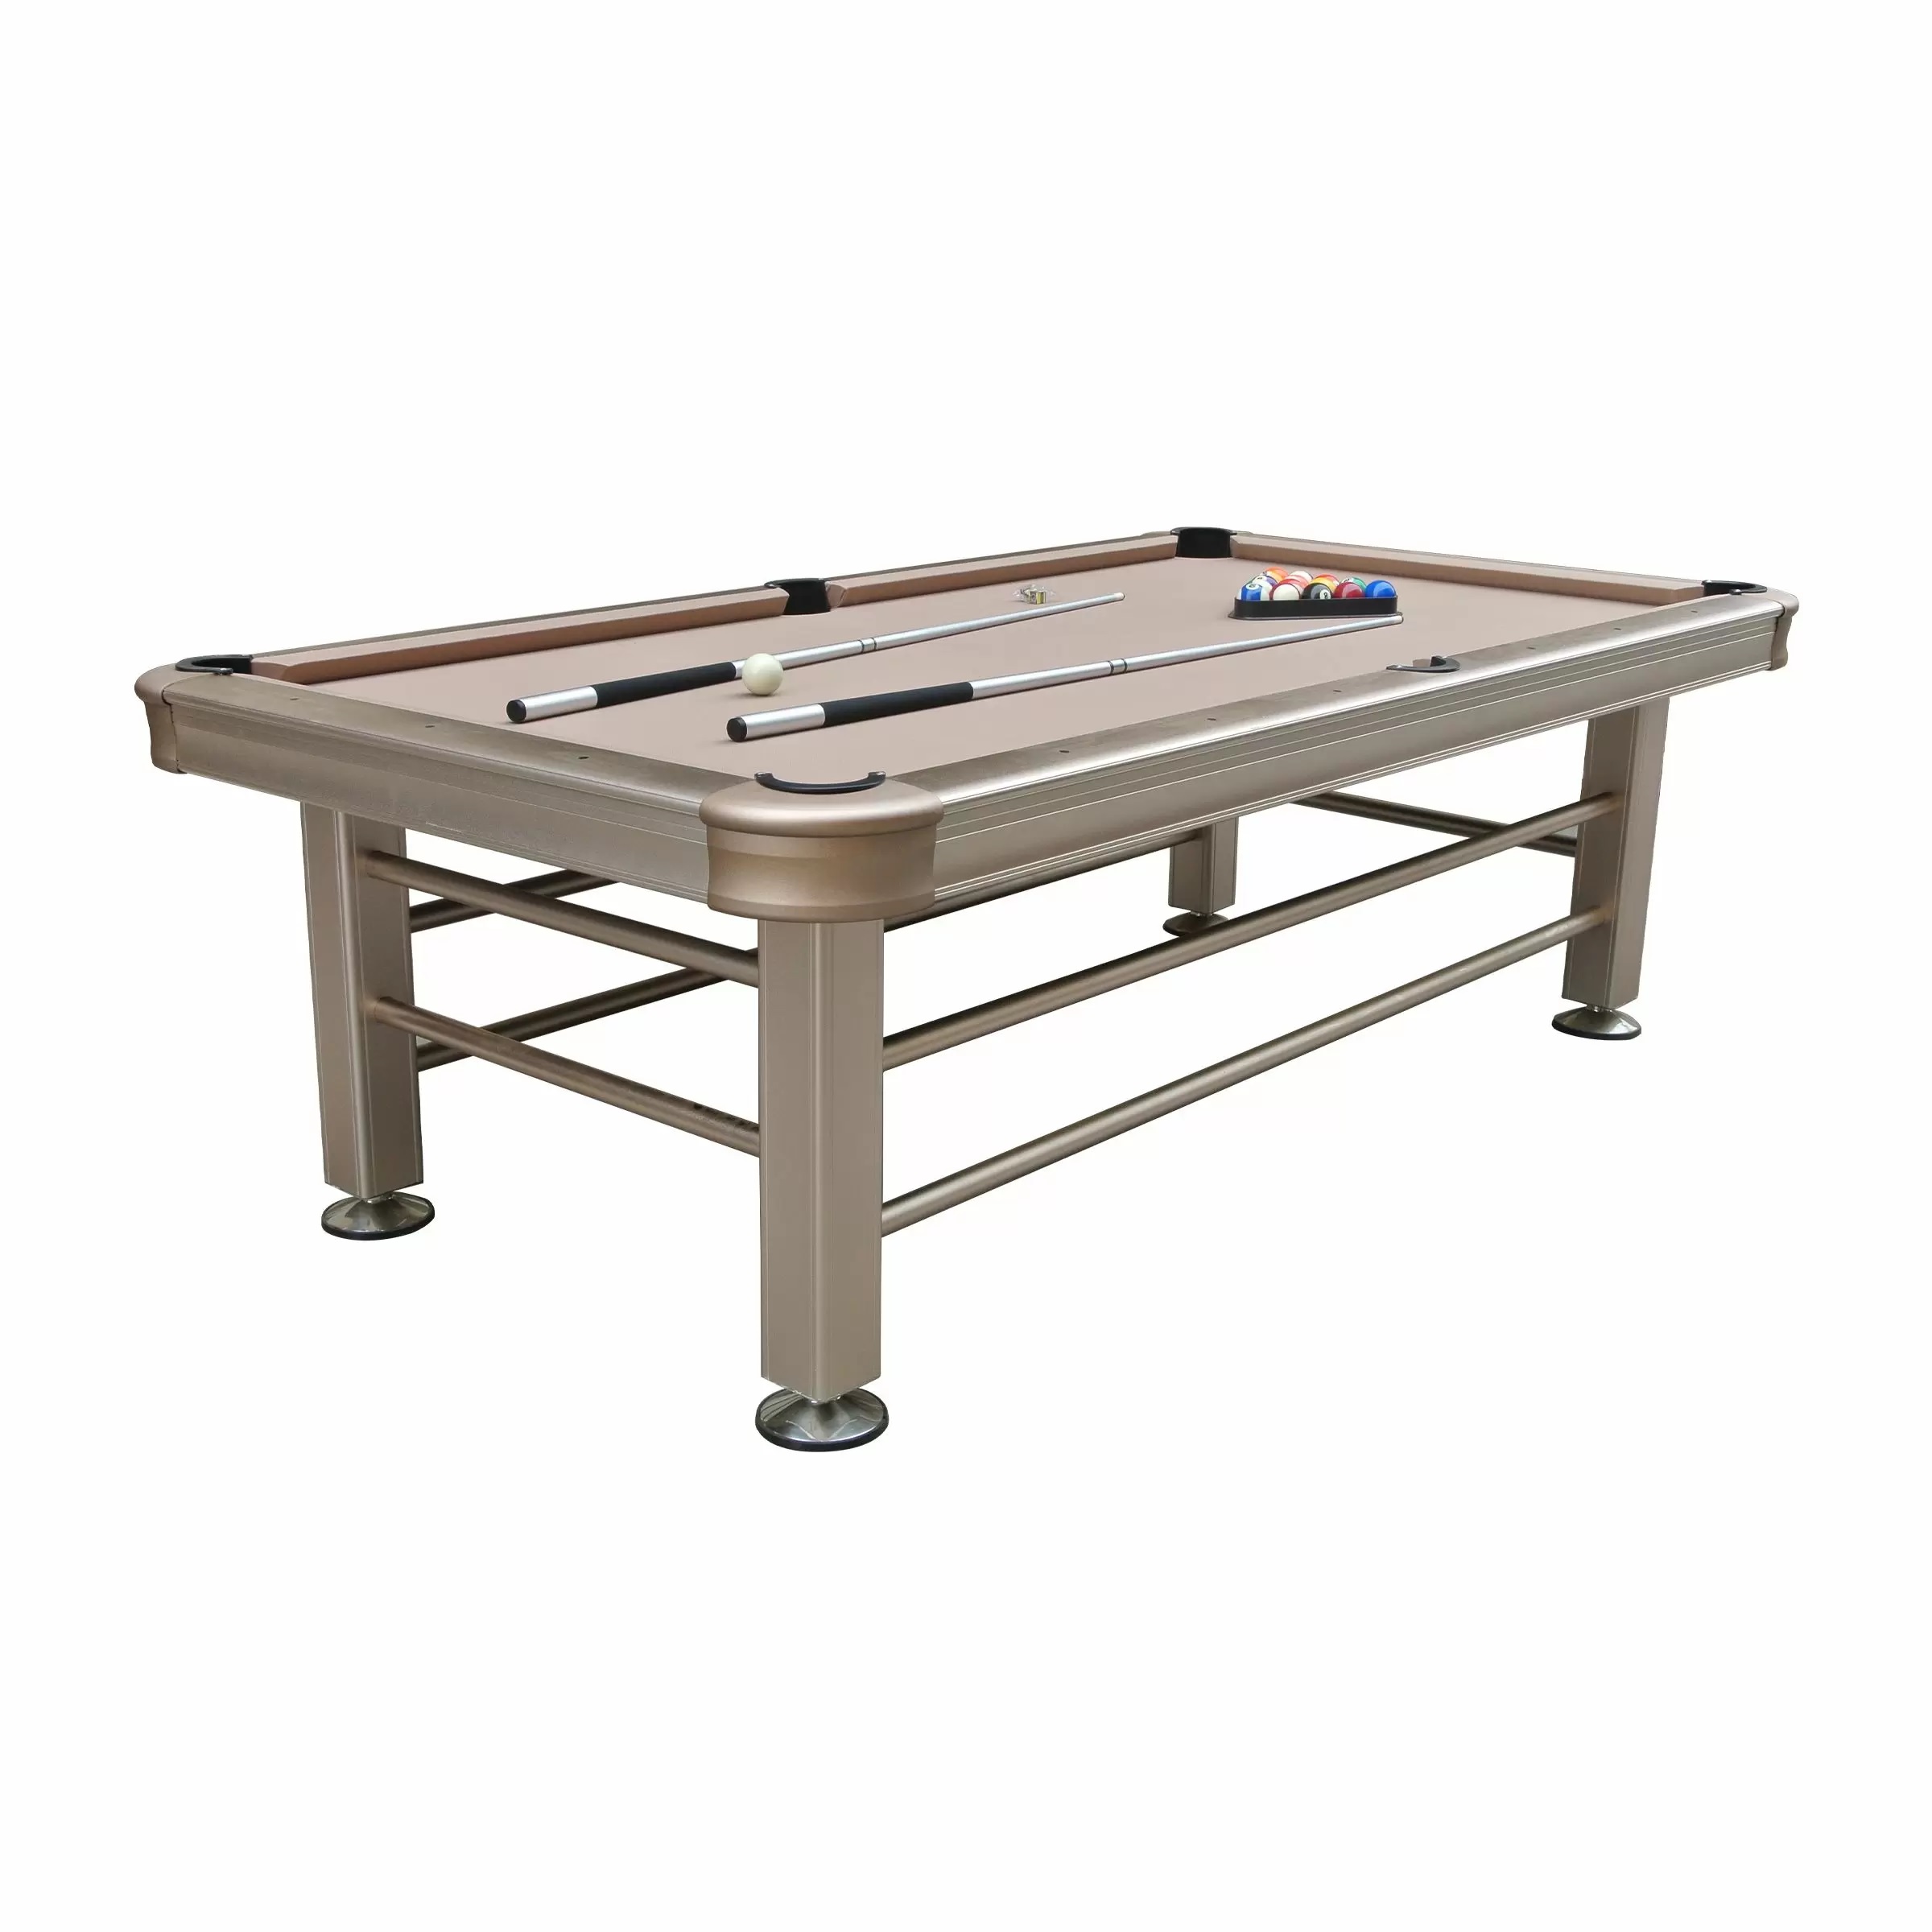 imperial-outdoor-pool-table-Champagne.jpg